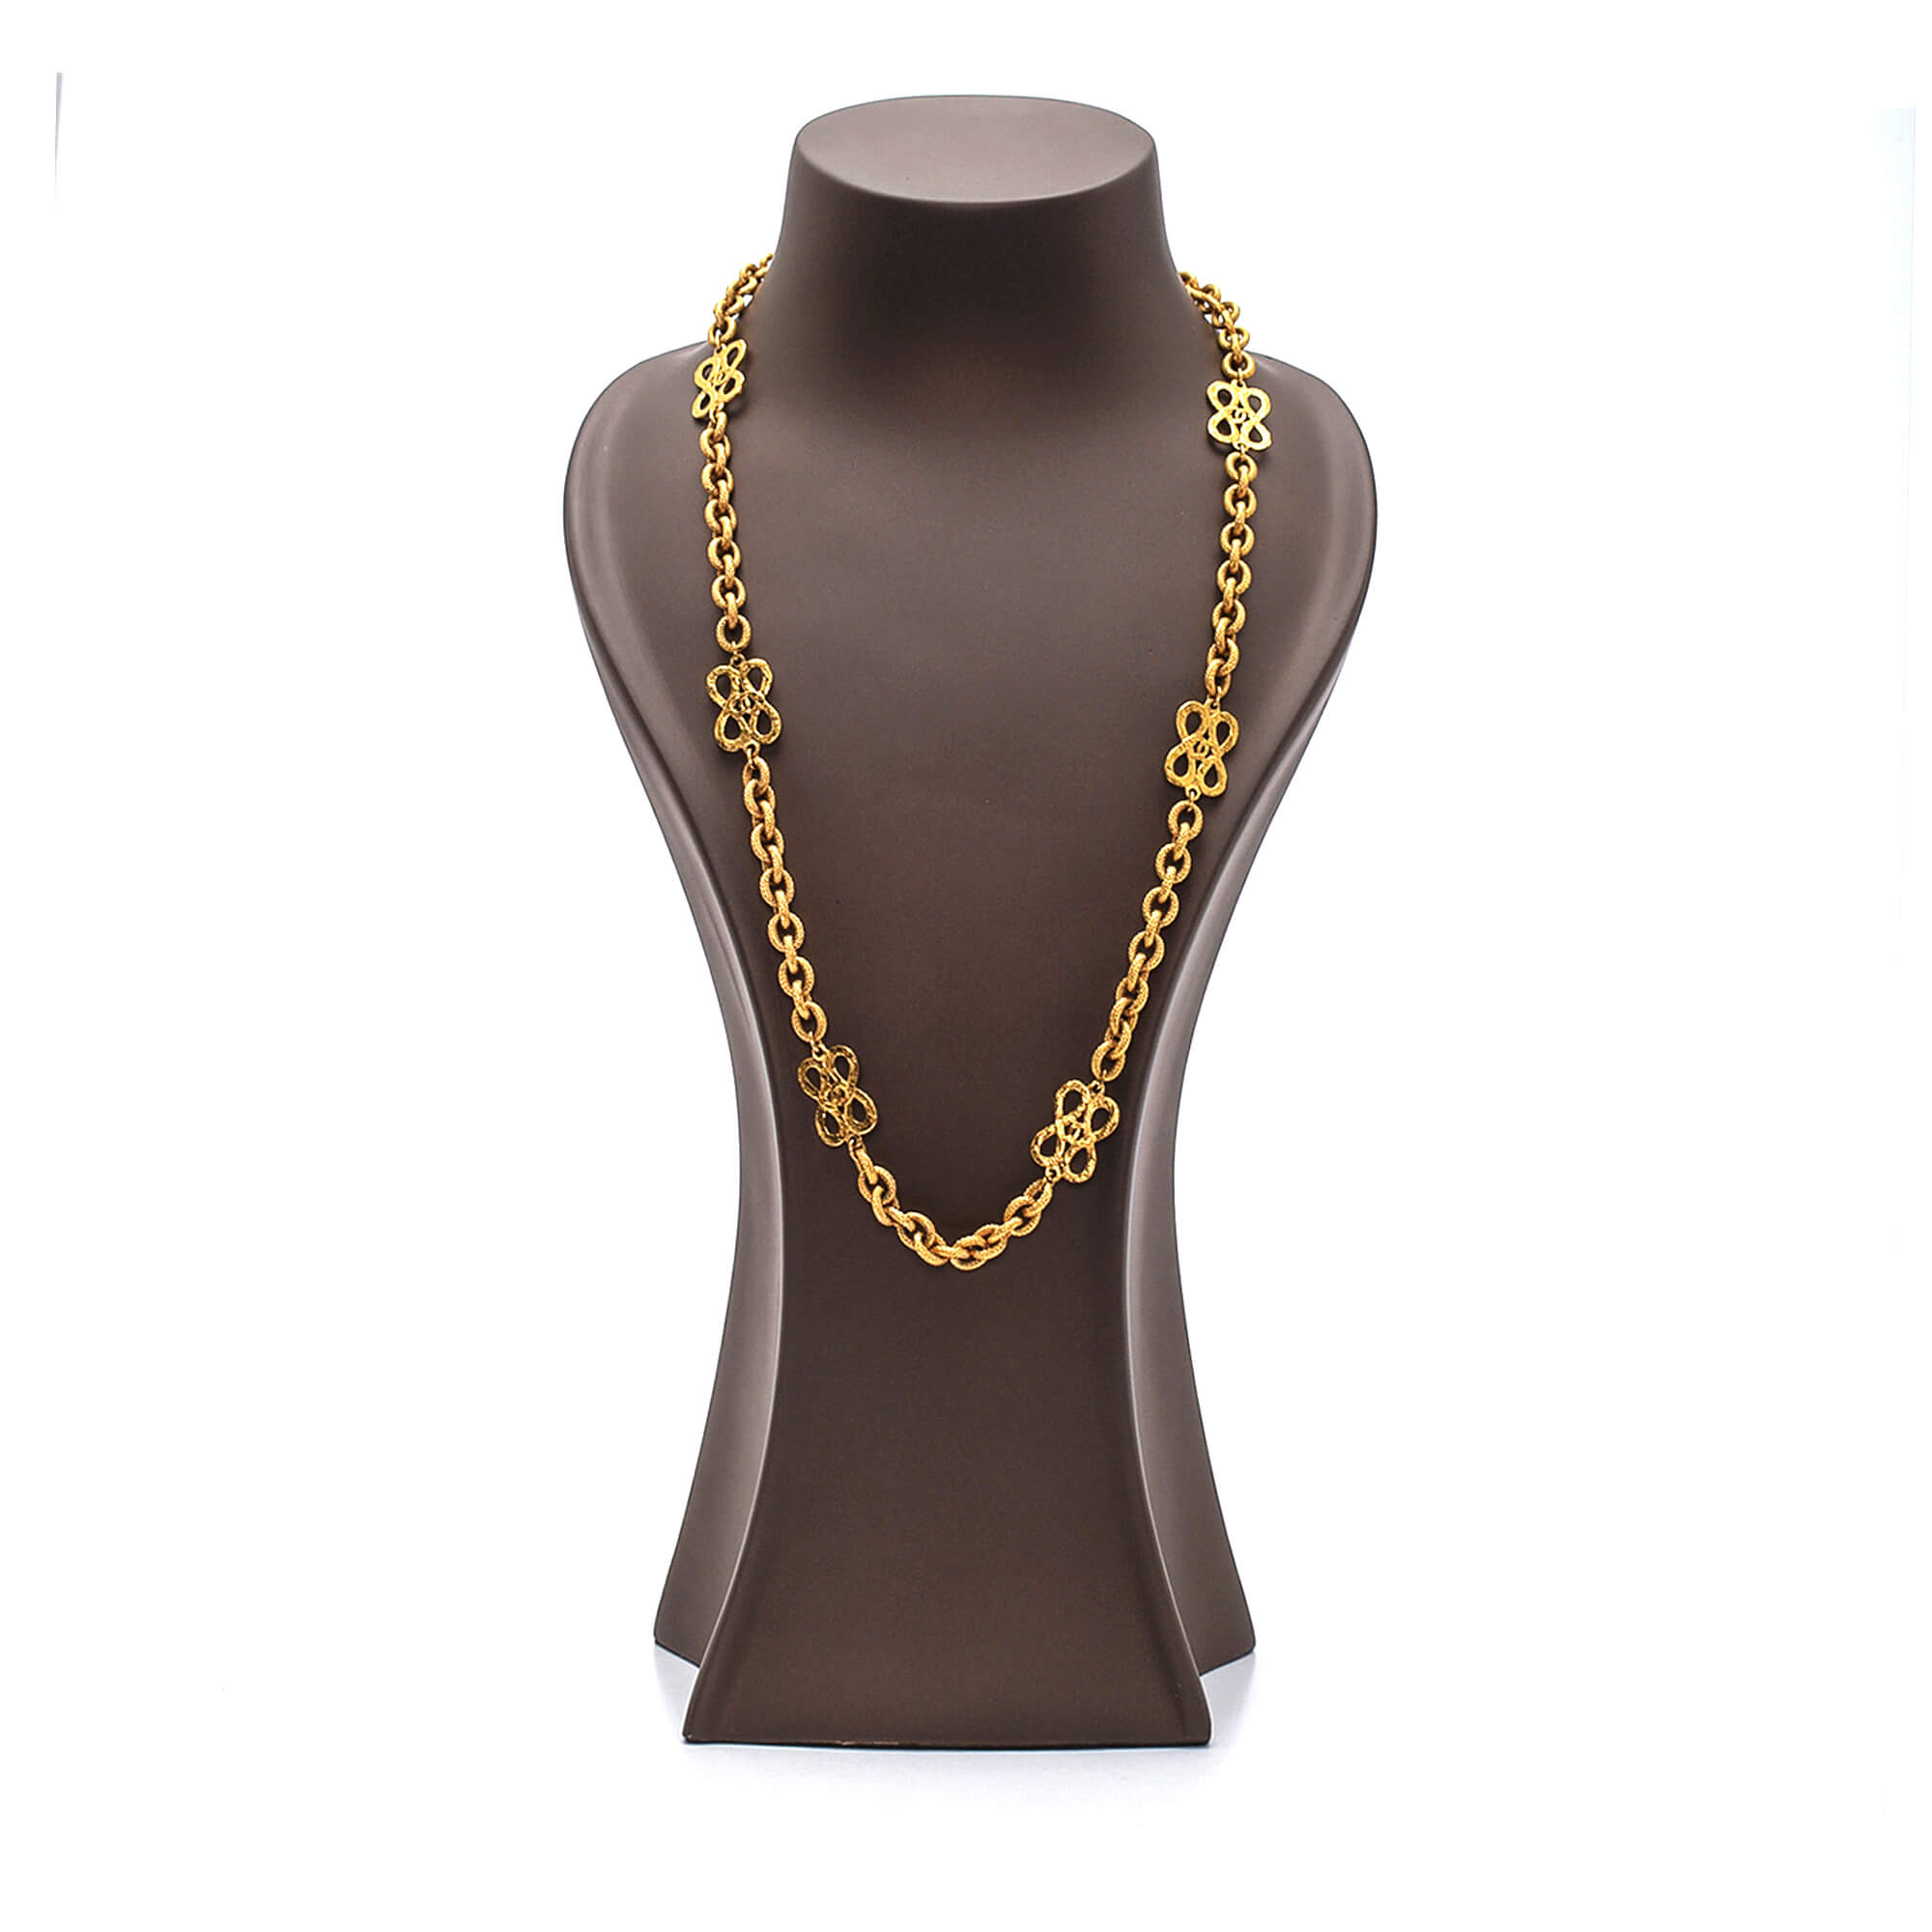 Chanel - Gold Tone Infinity Chain Necklace 